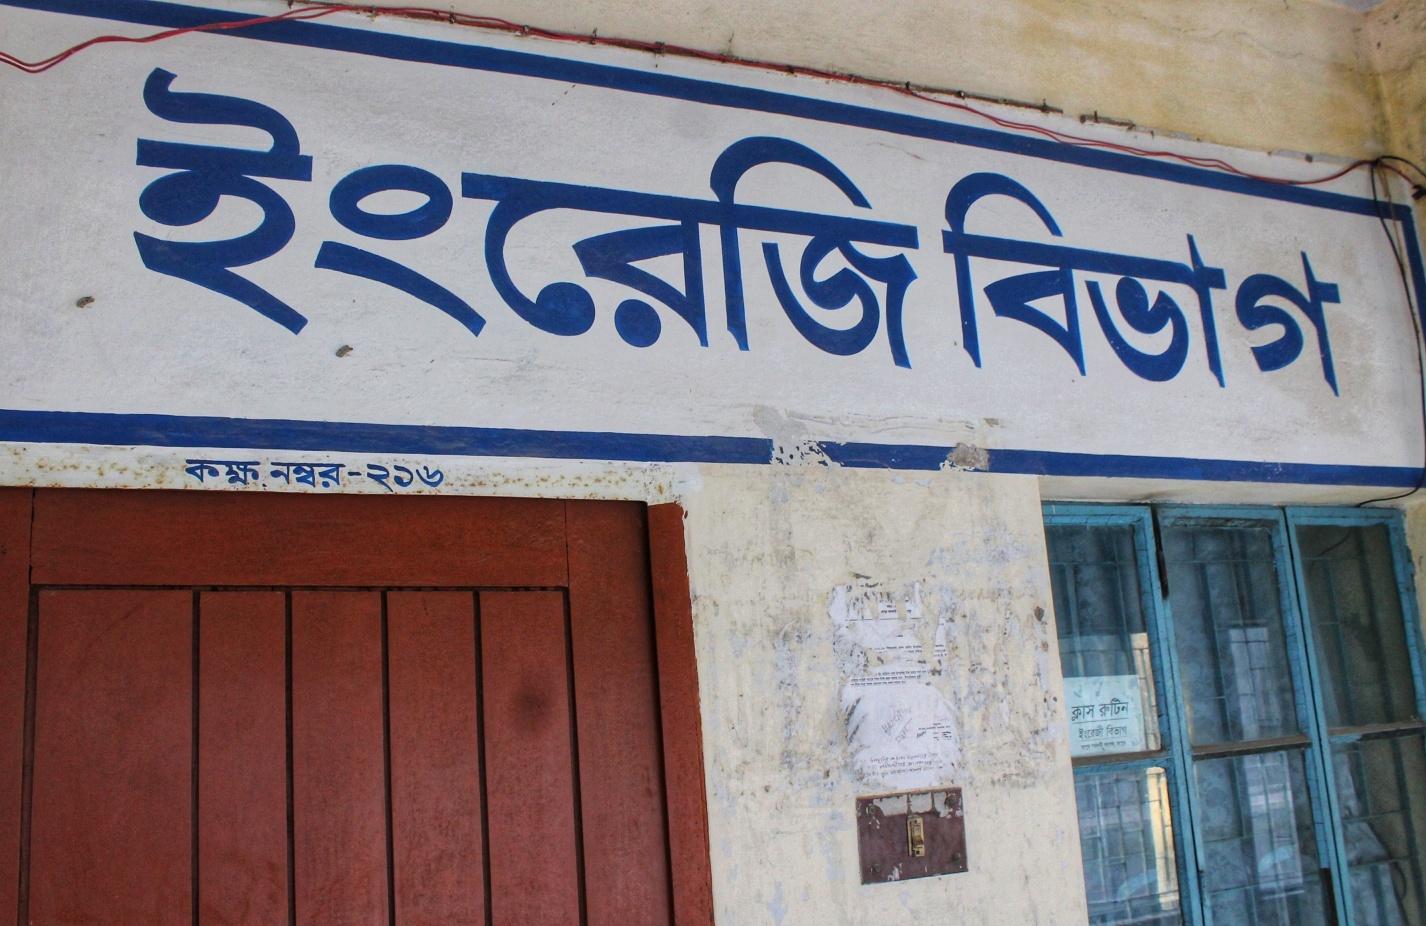 English department of the Rangpur Government College